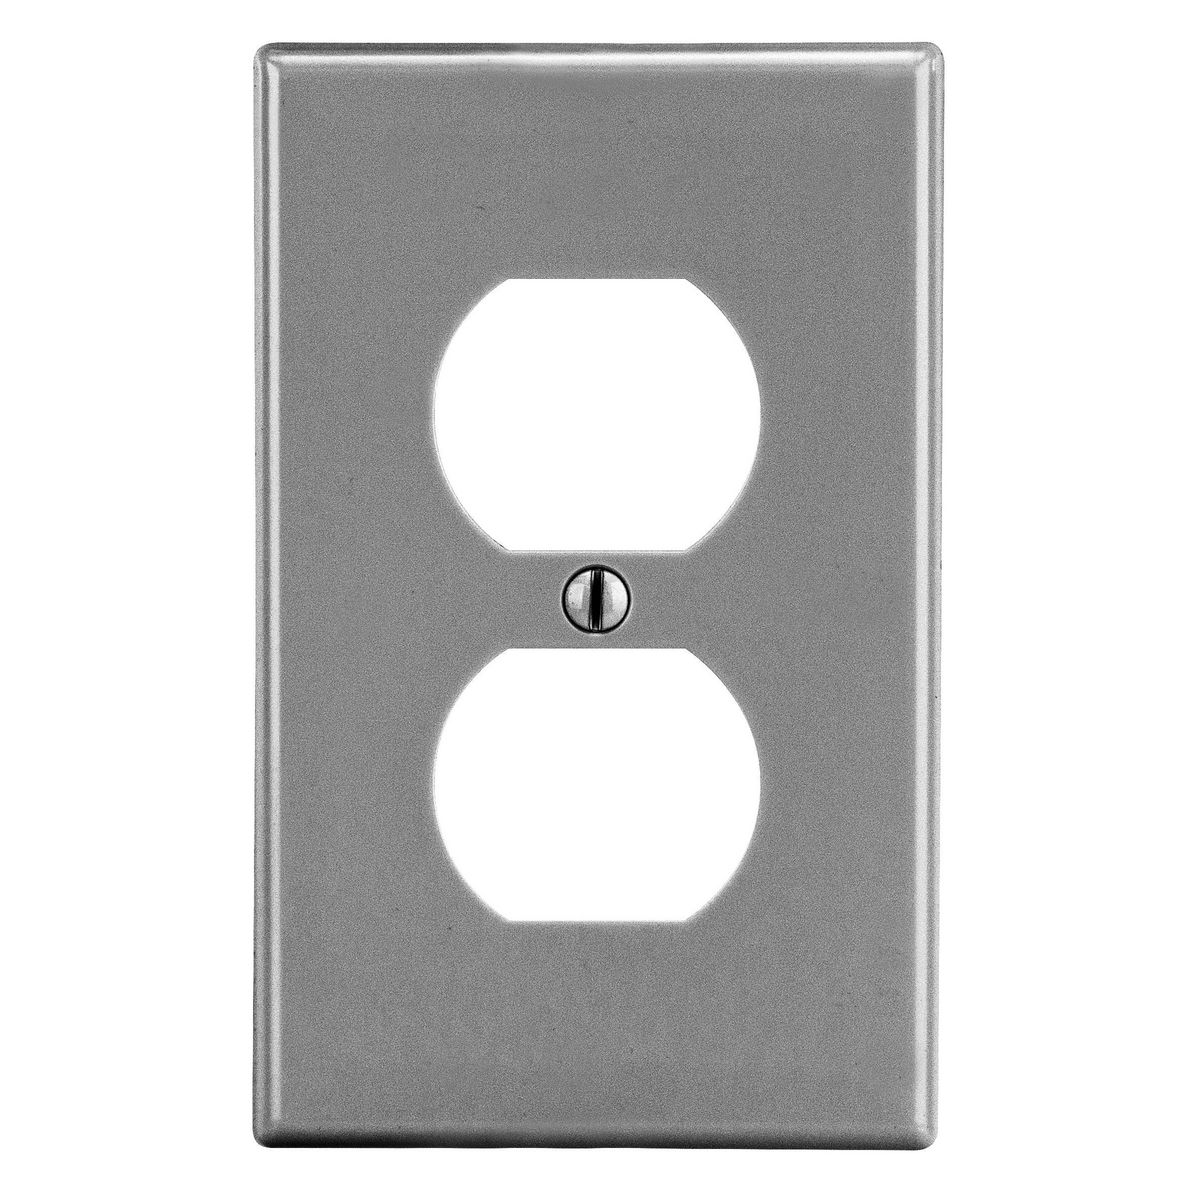 WALLPLATE, 1-G, 1) DUP, GY